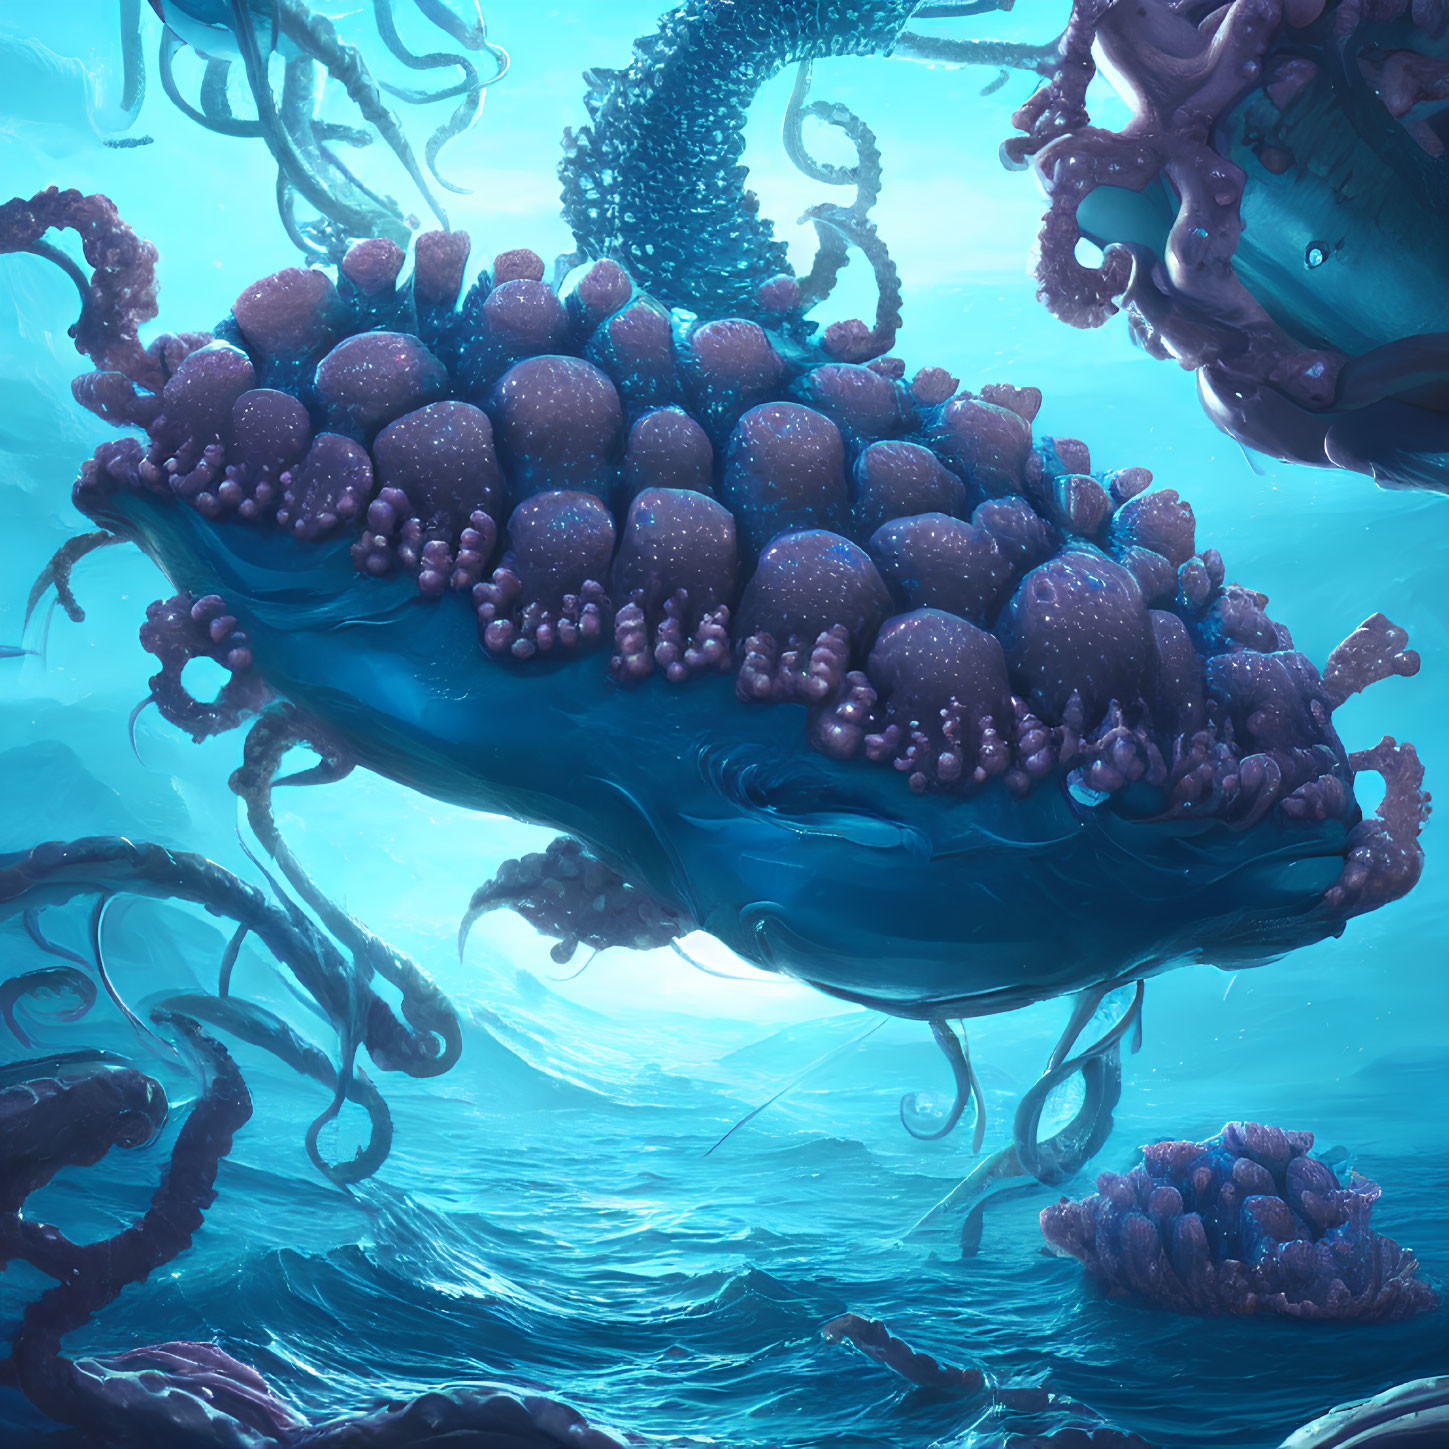 Fantastical underwater scene with turtle and domed shell surrounded by tentacles